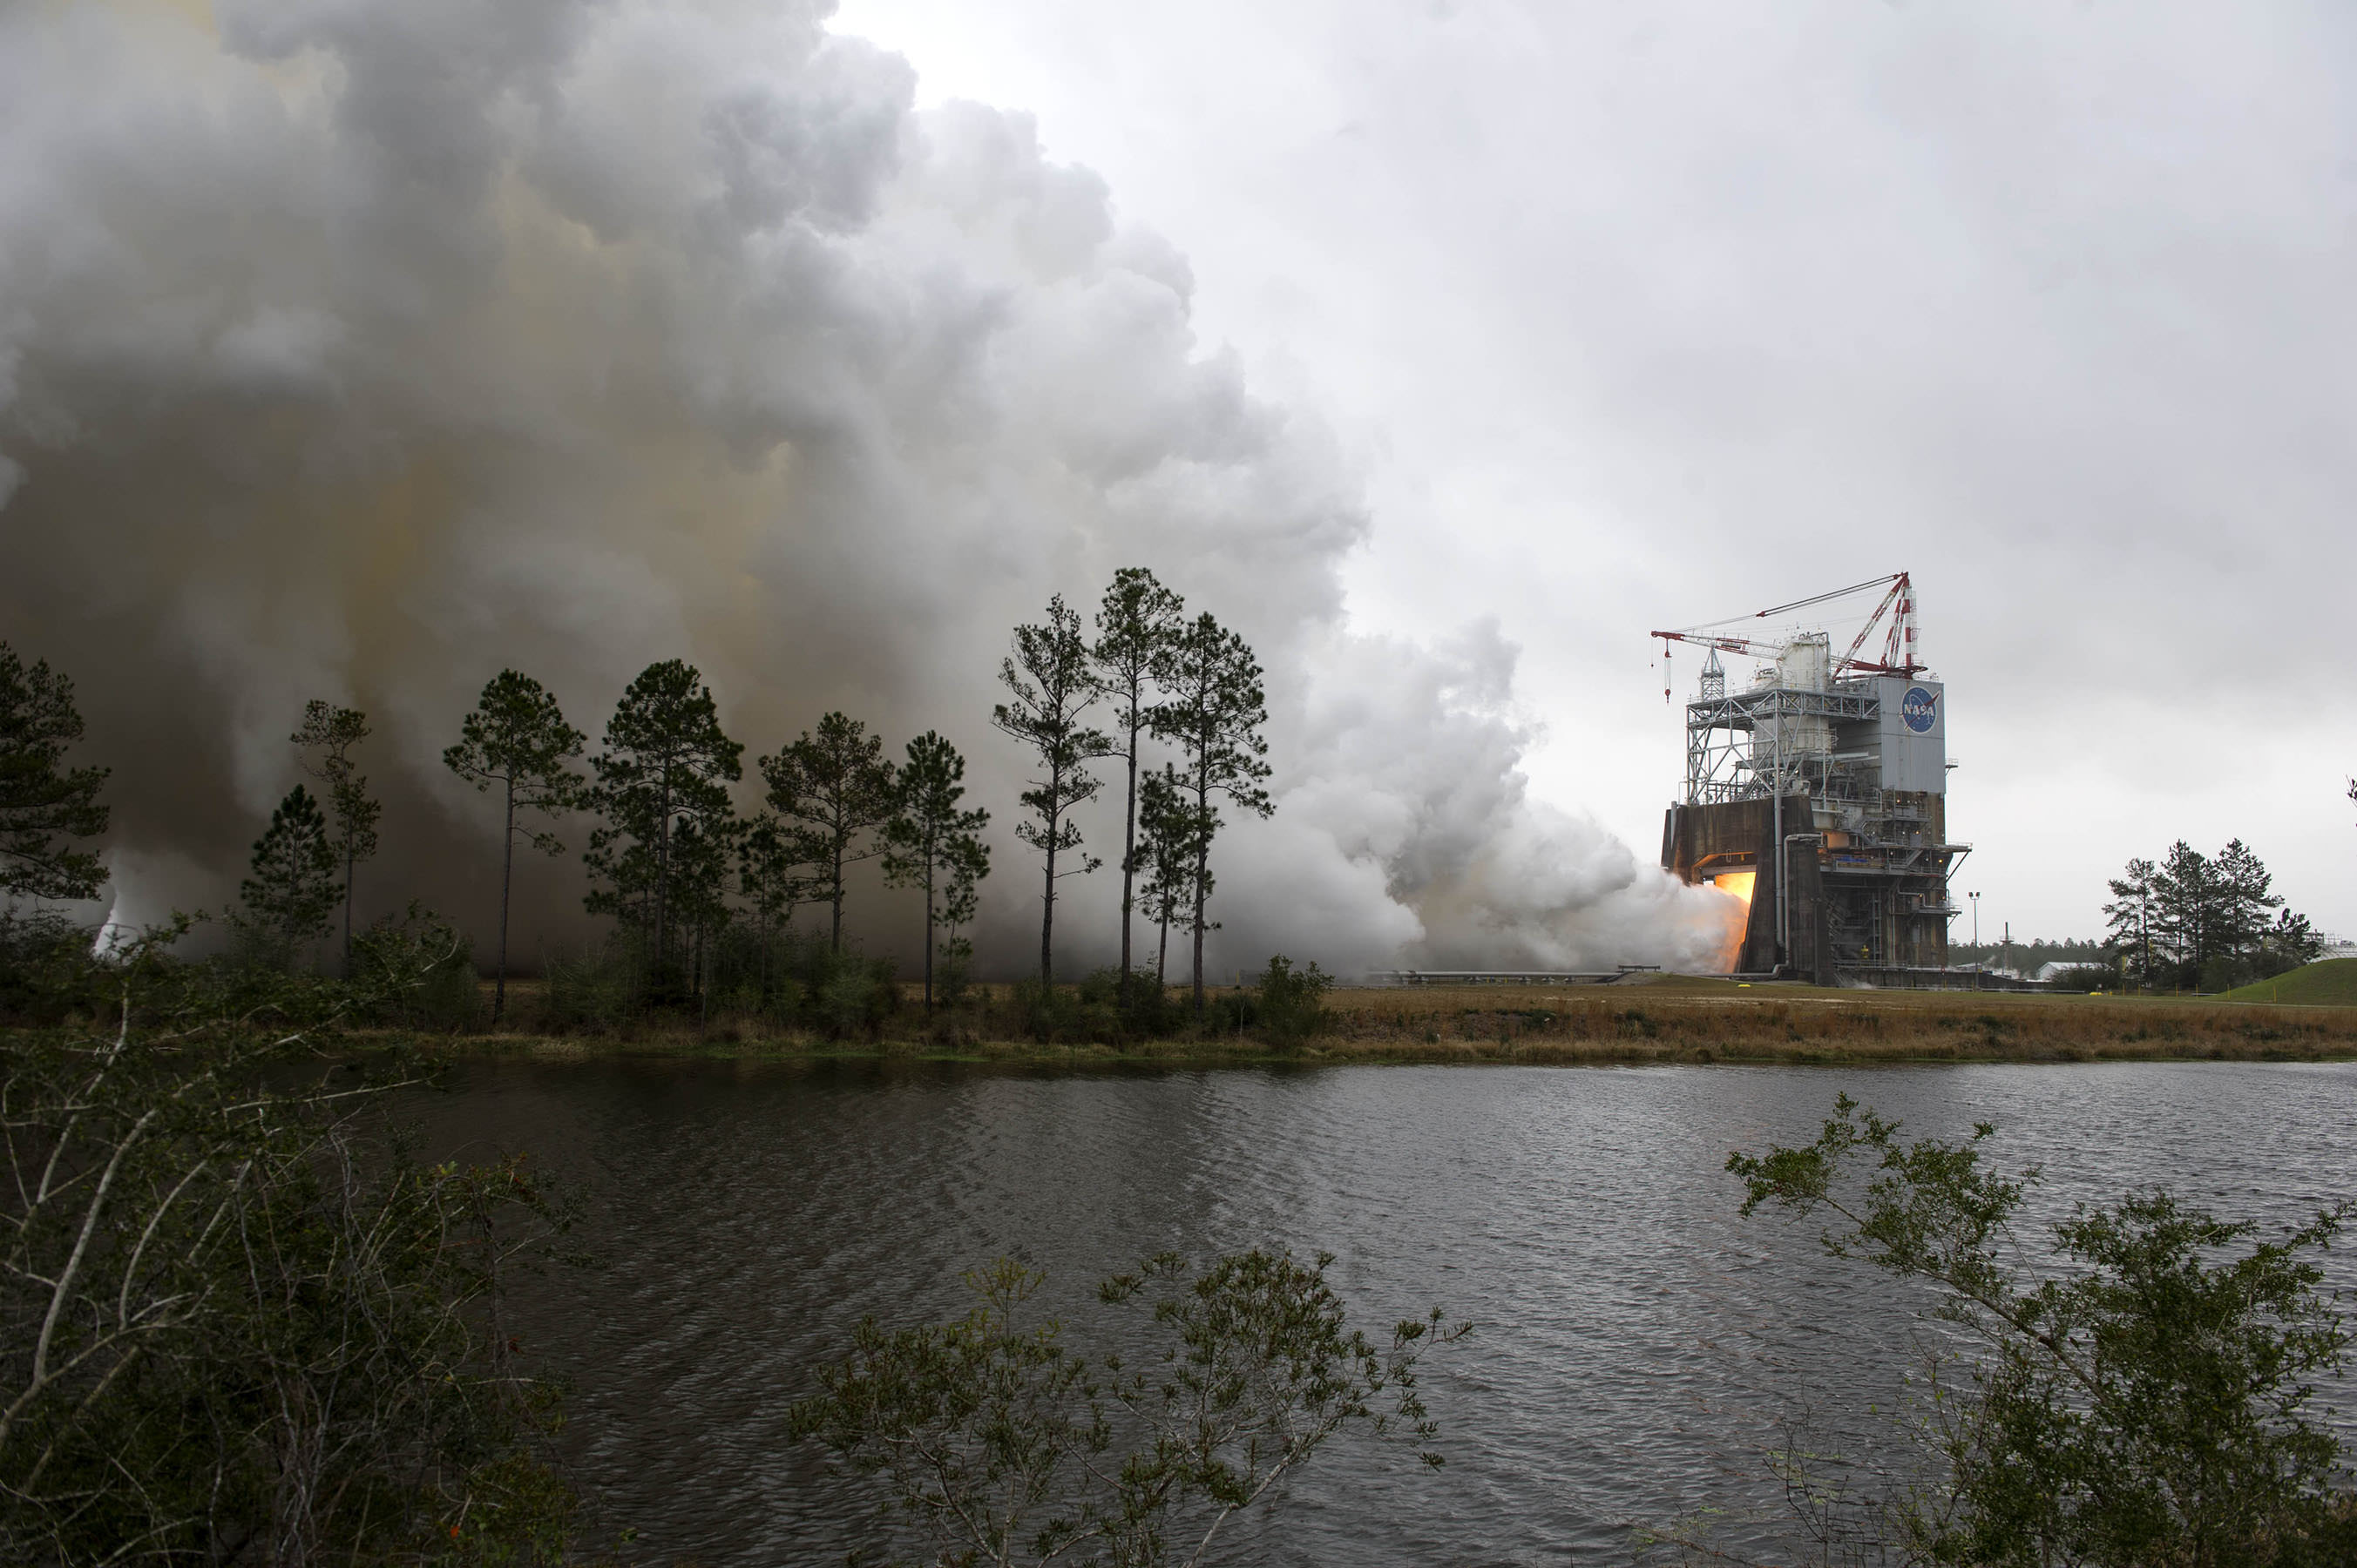 NASA engineers conduct a successfully test firing of RS-25 rocket engine No. 2059 on the A-1 Test Stand at NASA’s Stennis Space Center in Bay St. Louis, Mississippi. The hot fire marks the first test of an RS-25 flight engine for NASA’s new Space Launch System vehicle.  Credits: NASA/SSC